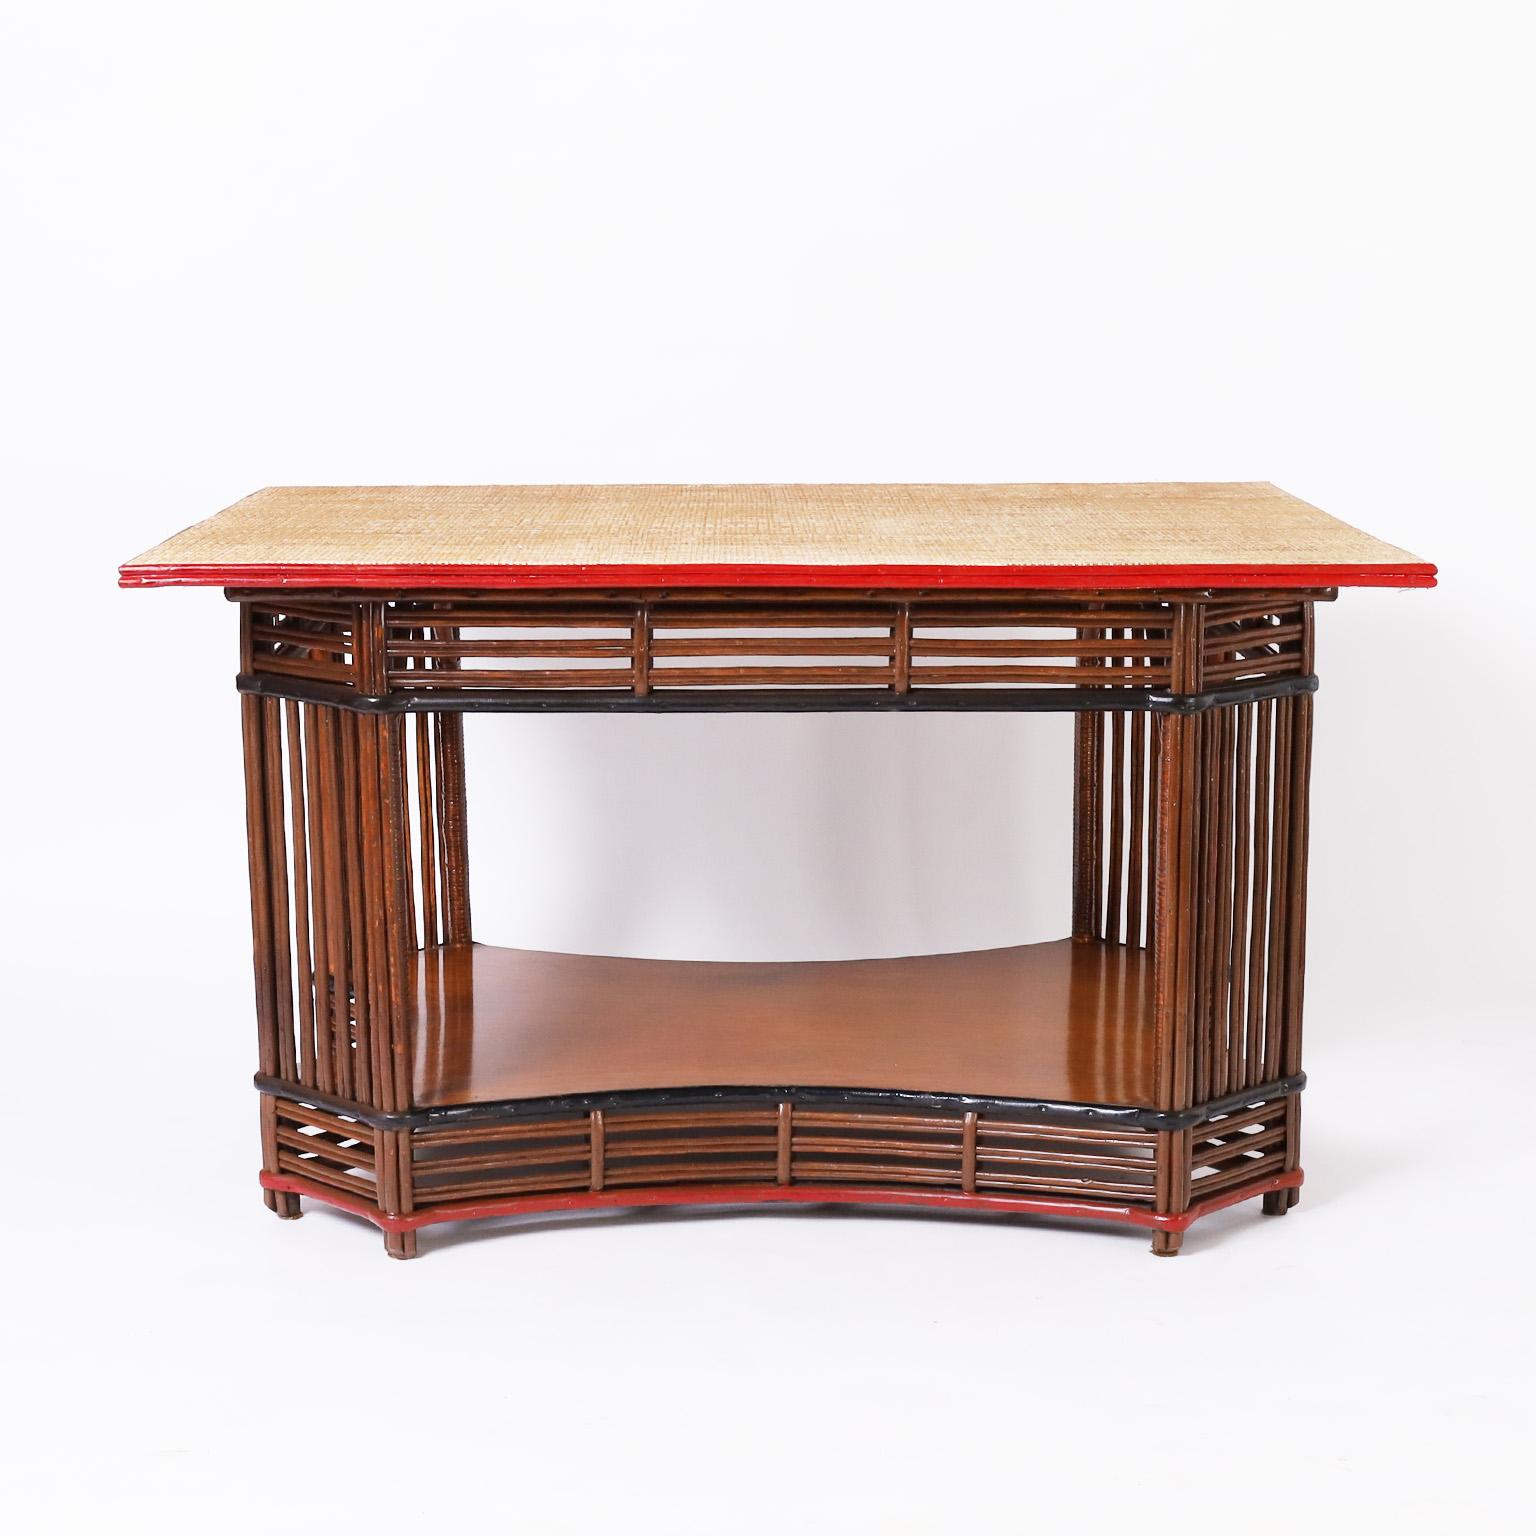 Impressive 1930s art deco table having a grasscloth top over a rattan or stick wicker base highlighted in red and black with a mahogany lower tier.